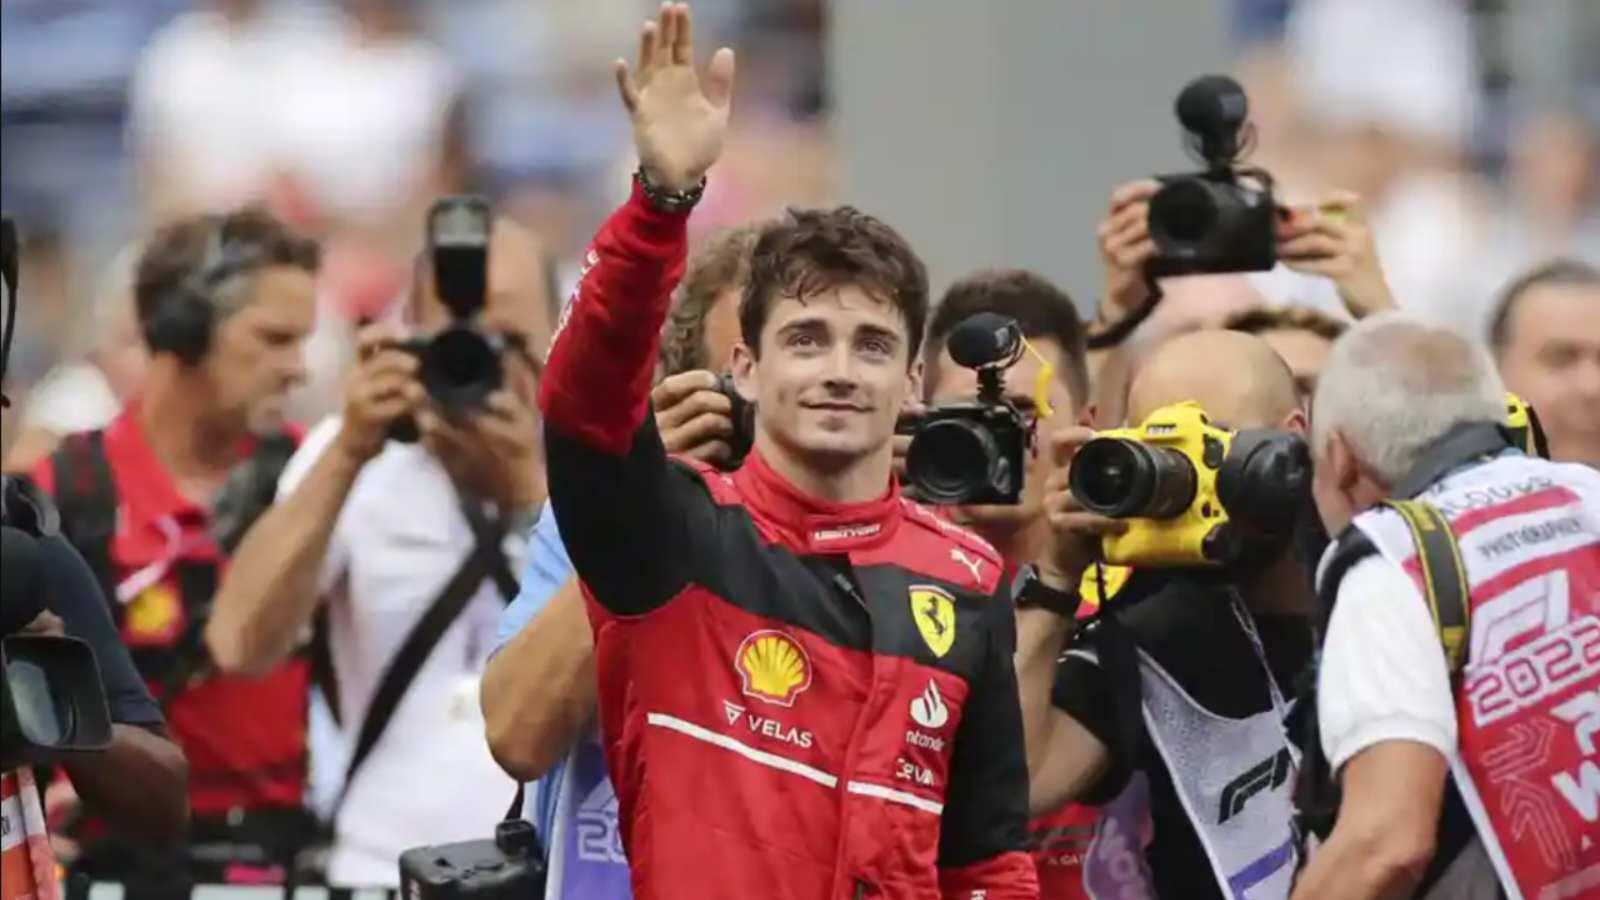 2022 Monaco Grand Prix Betting: Will Lady Luck finally shine on Leclerc in his home race?